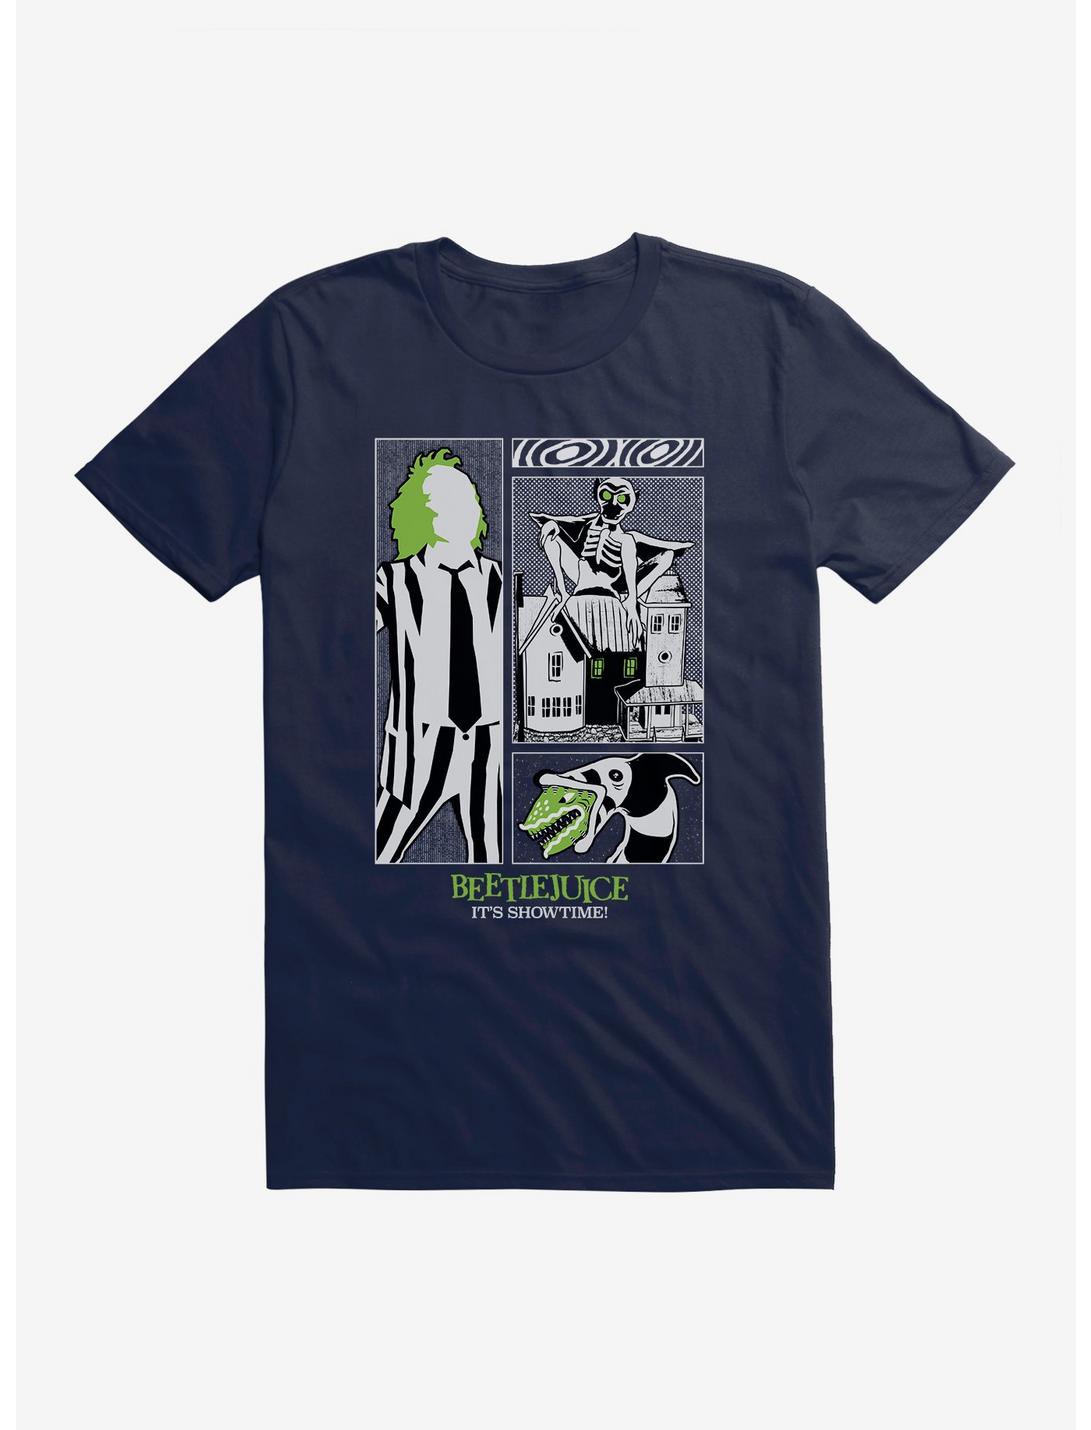 Beetlejuice It's Showtime! T-Shirt, MIDNIGHT NAVY, hi-res